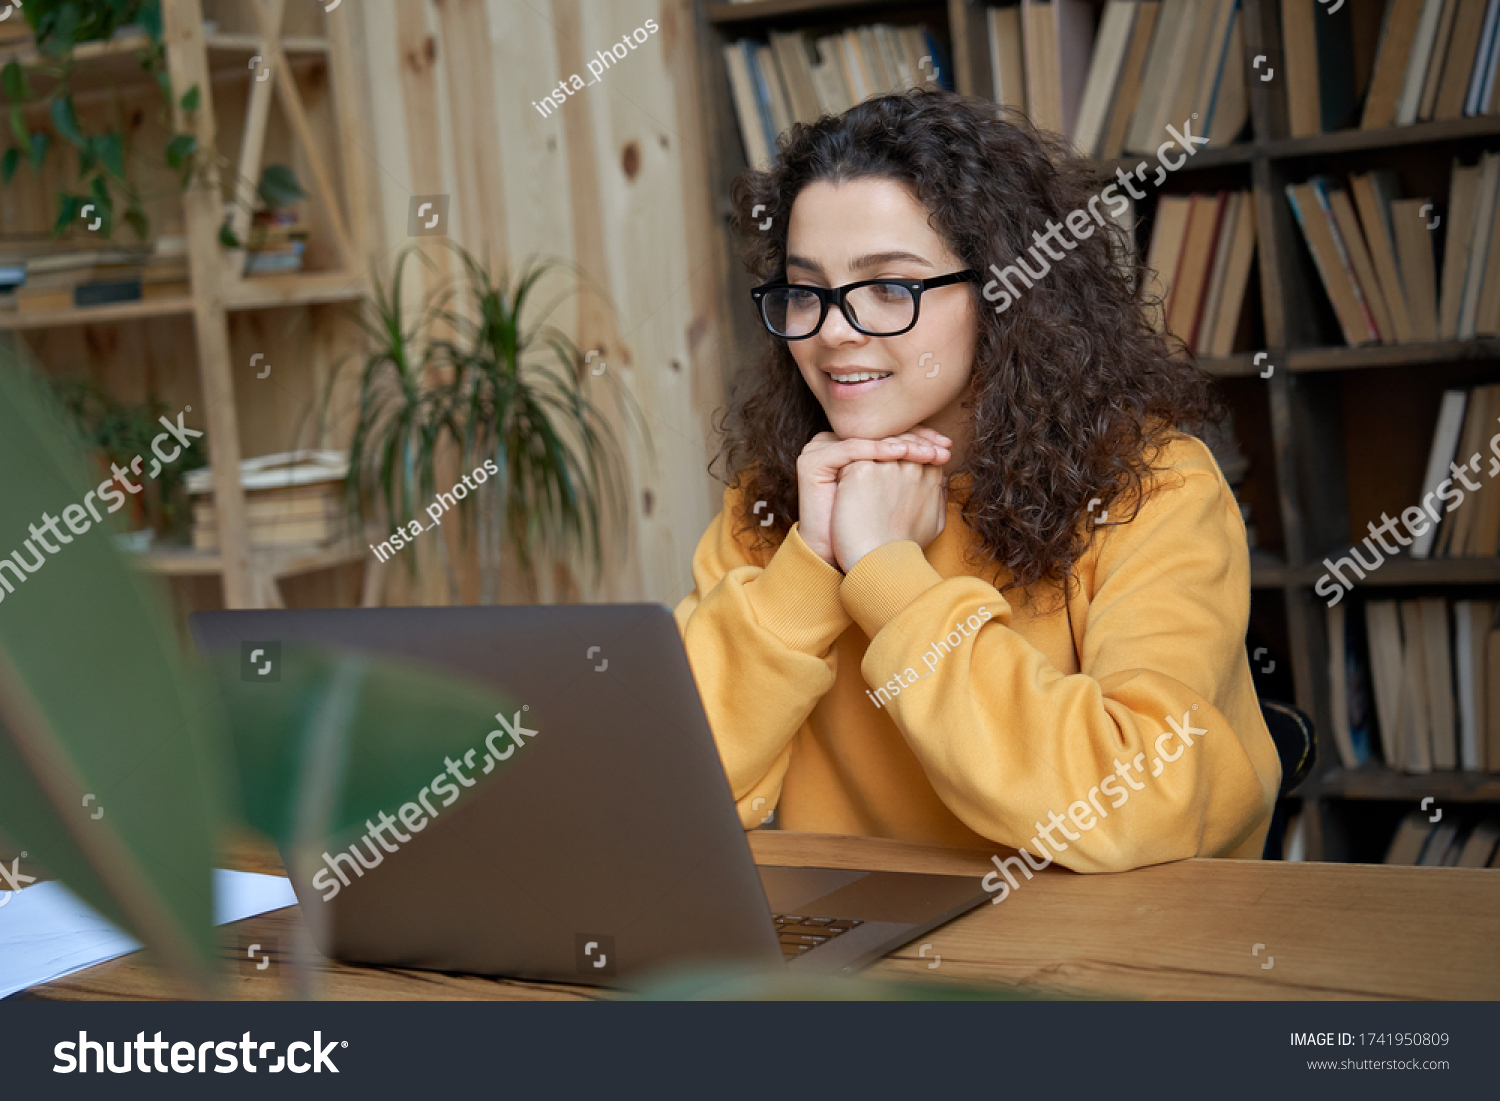 Hispanic teen girl, latin young woman school student, remote worker learning watching online webinar webcast class looking at laptop elearning distance course or video calling remote teacher. #1741950809